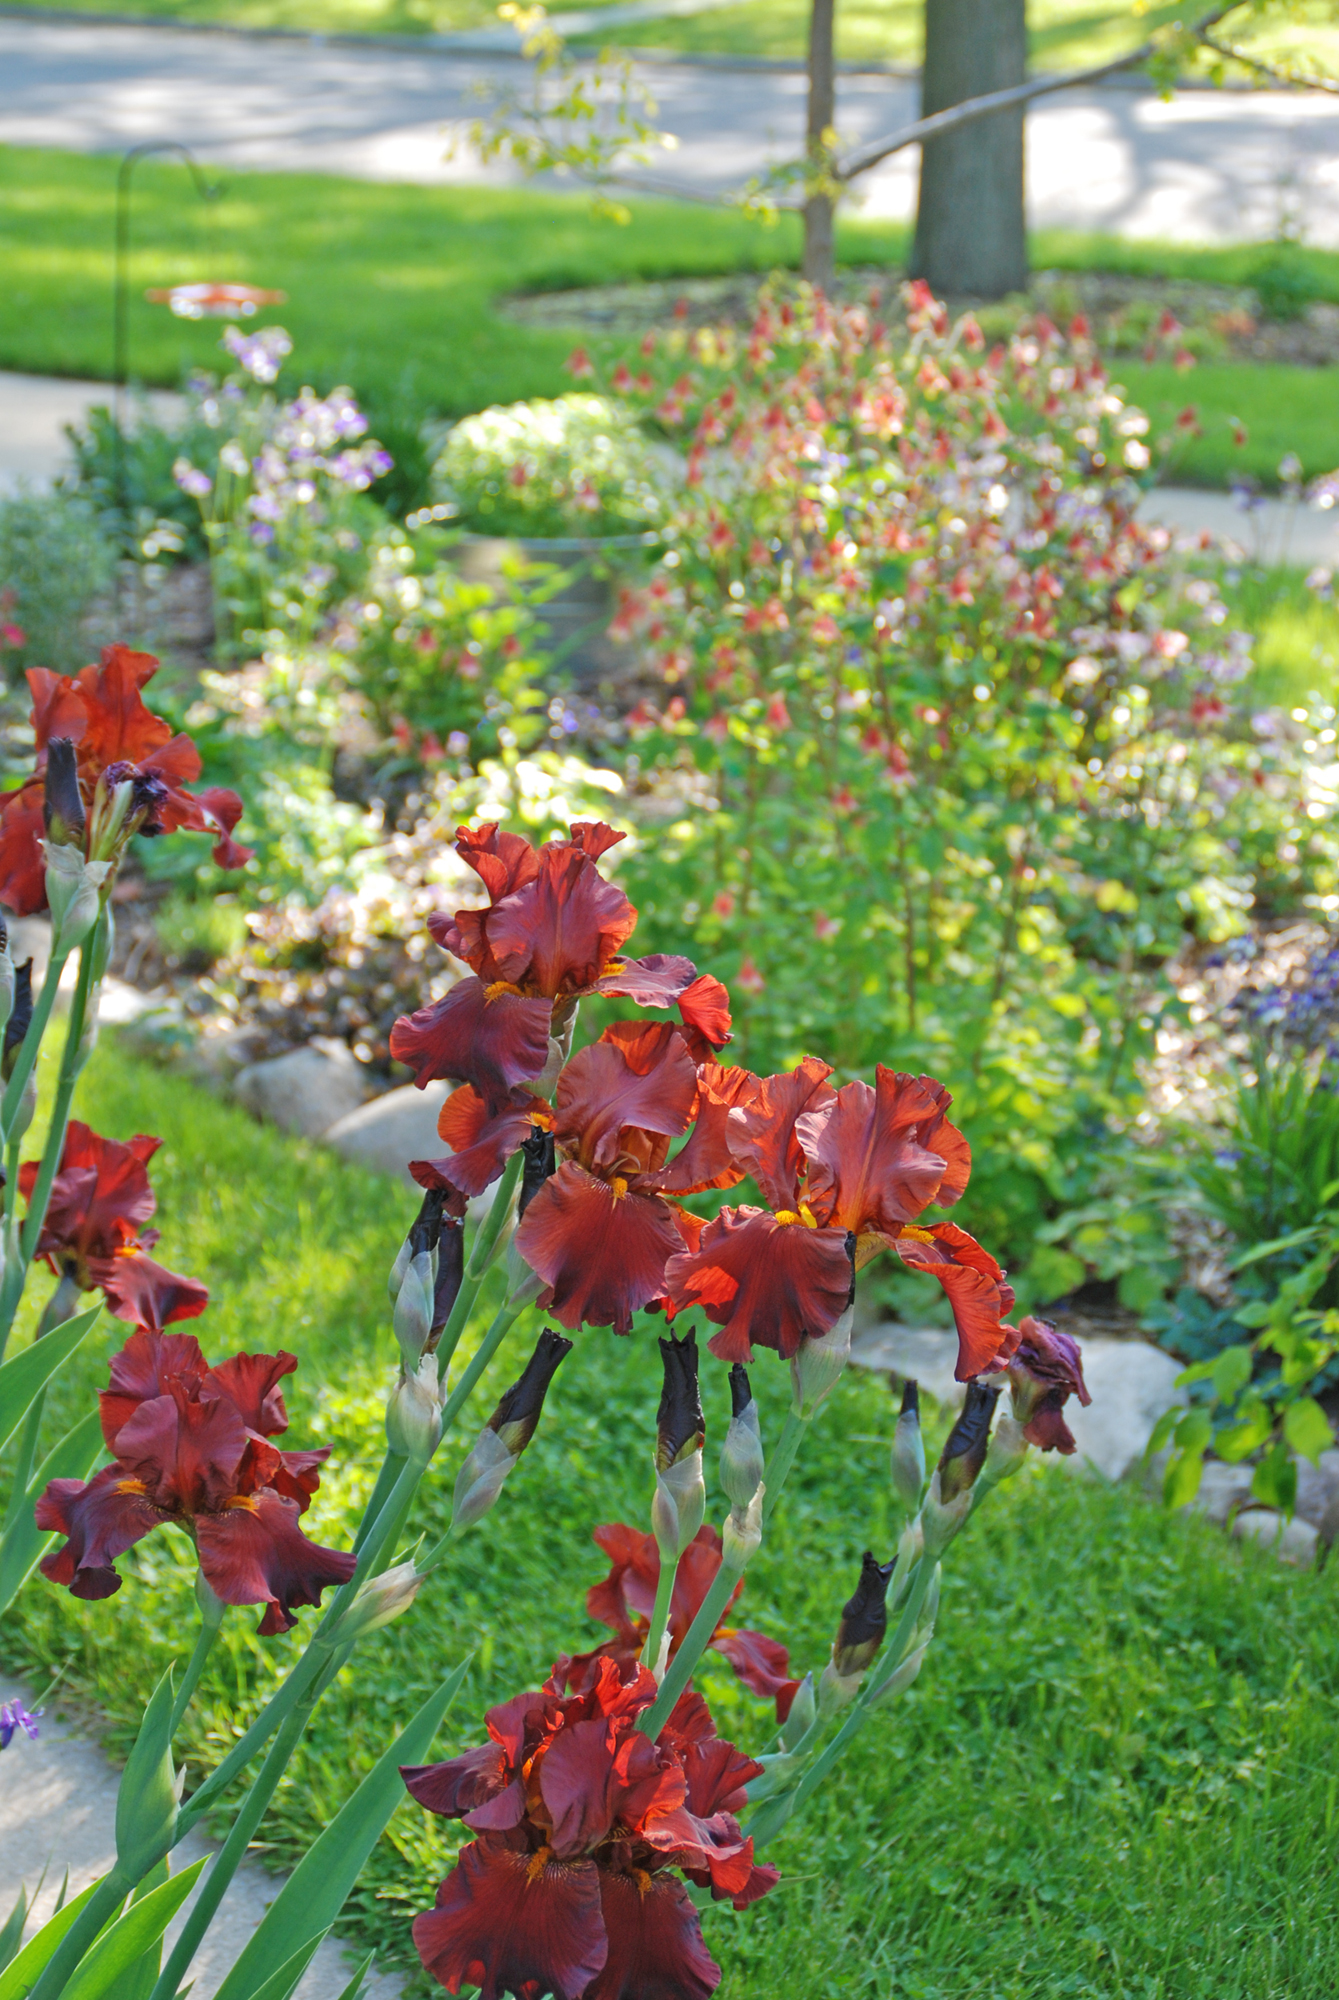 Iris and Columbine add beauty and color to the landscape.